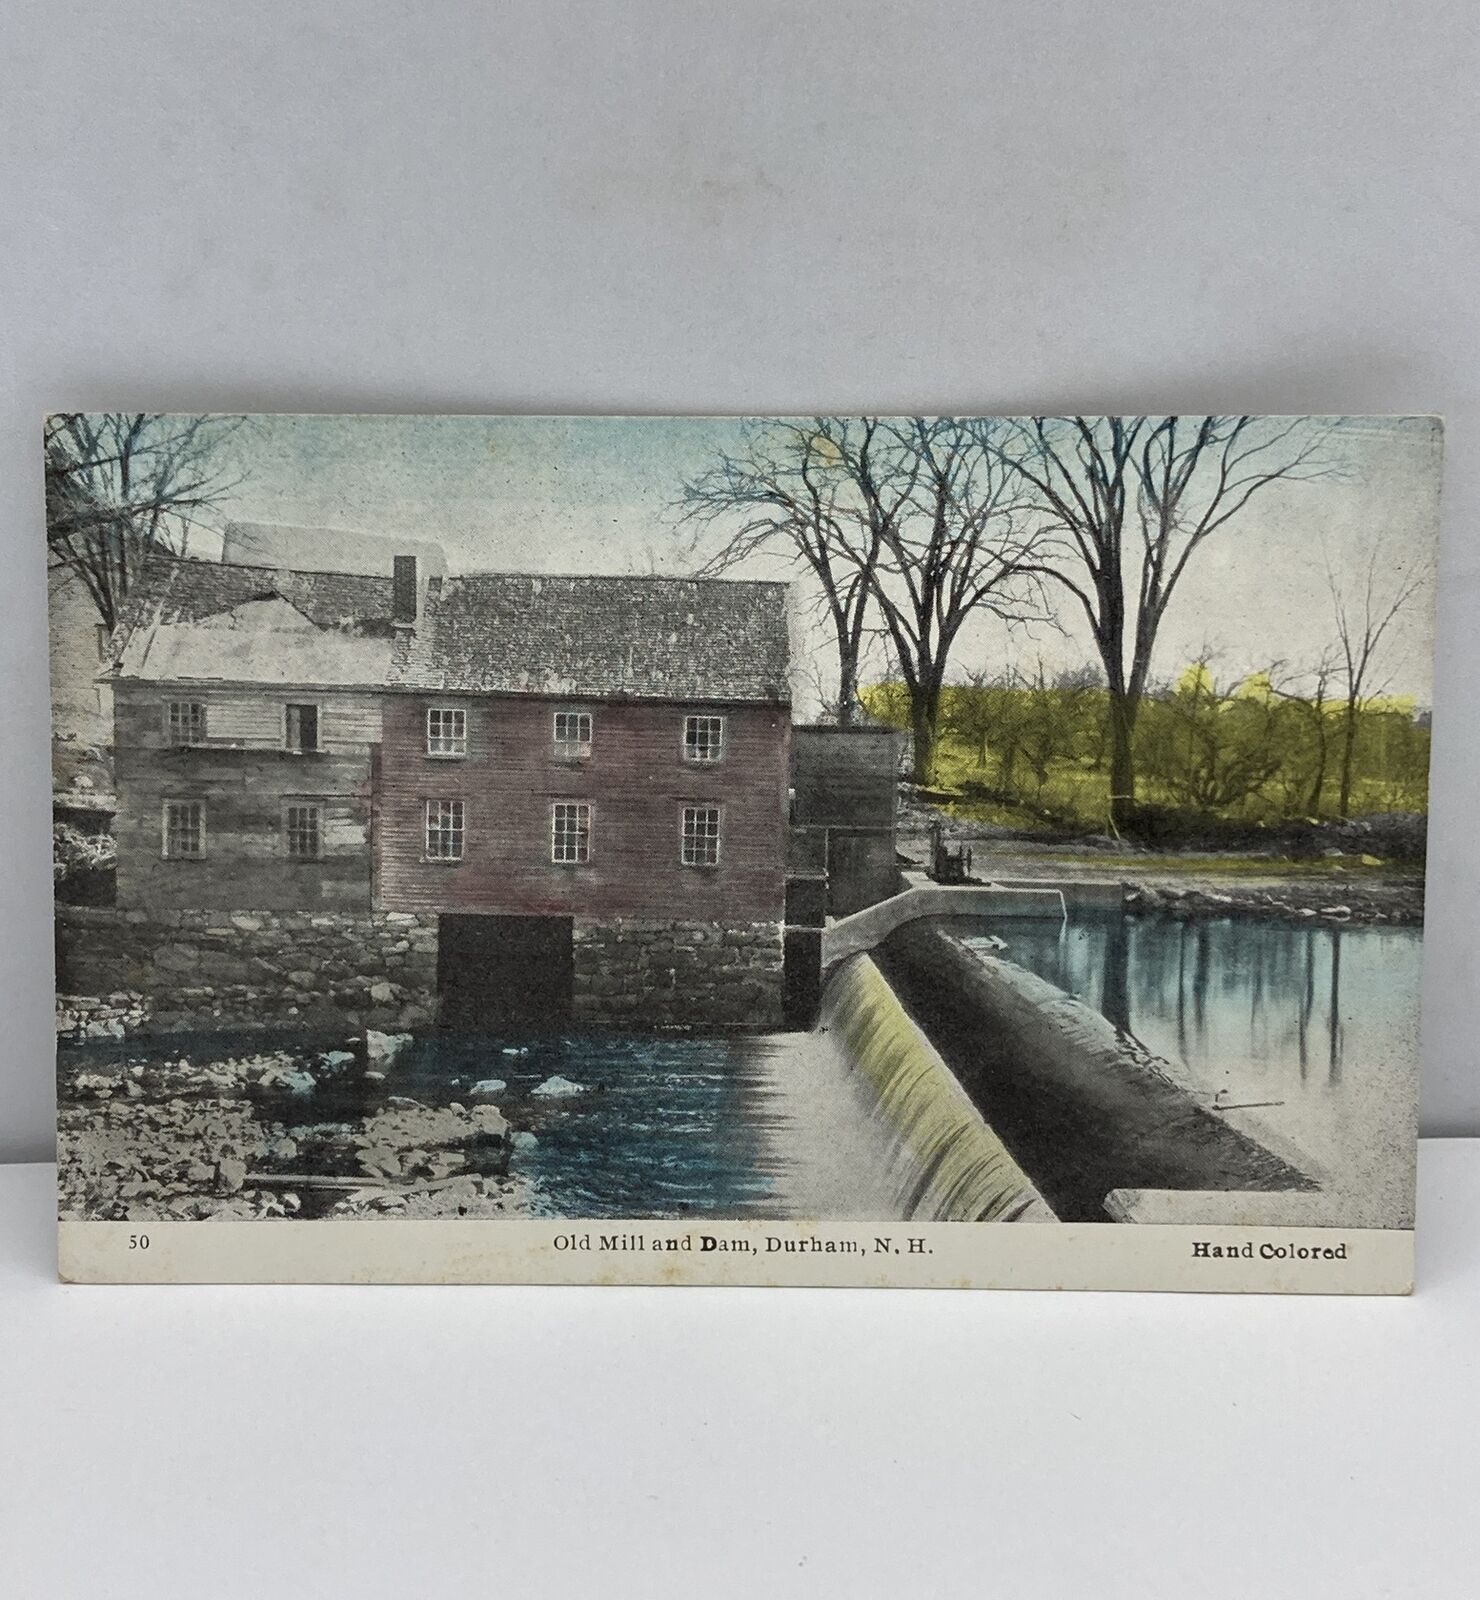 Old Mill and Dam Durham NH Roof Damage Hand Colored FW Swallow Unposted Postcard